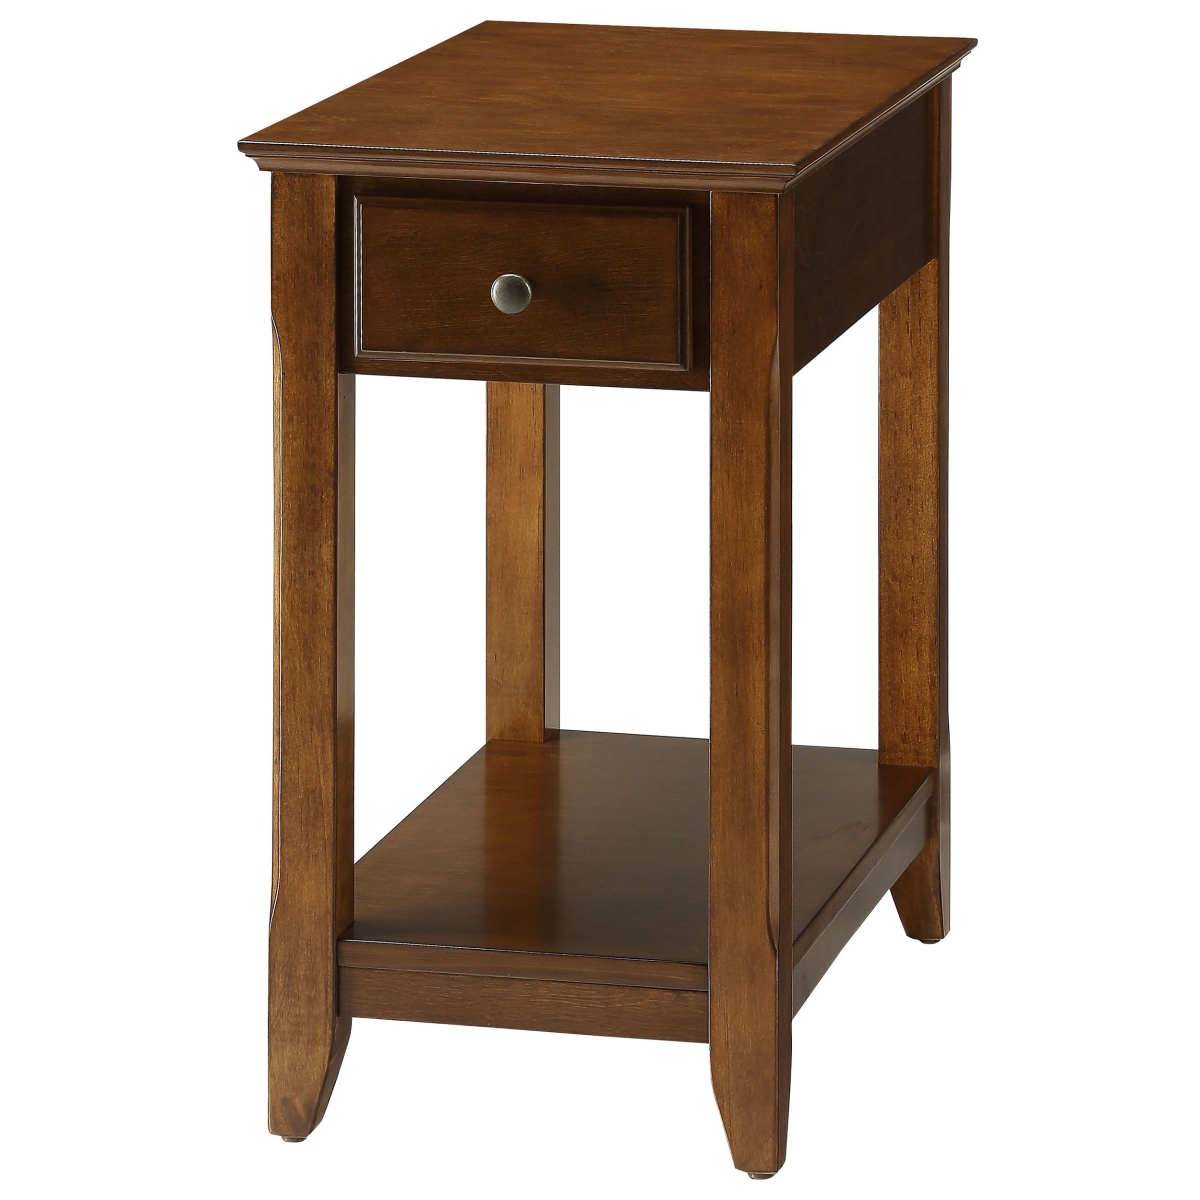 Urban Designs 4763828 Bega Wooden Accent Side Table, Walnut - 23 X 22 X 13 In.